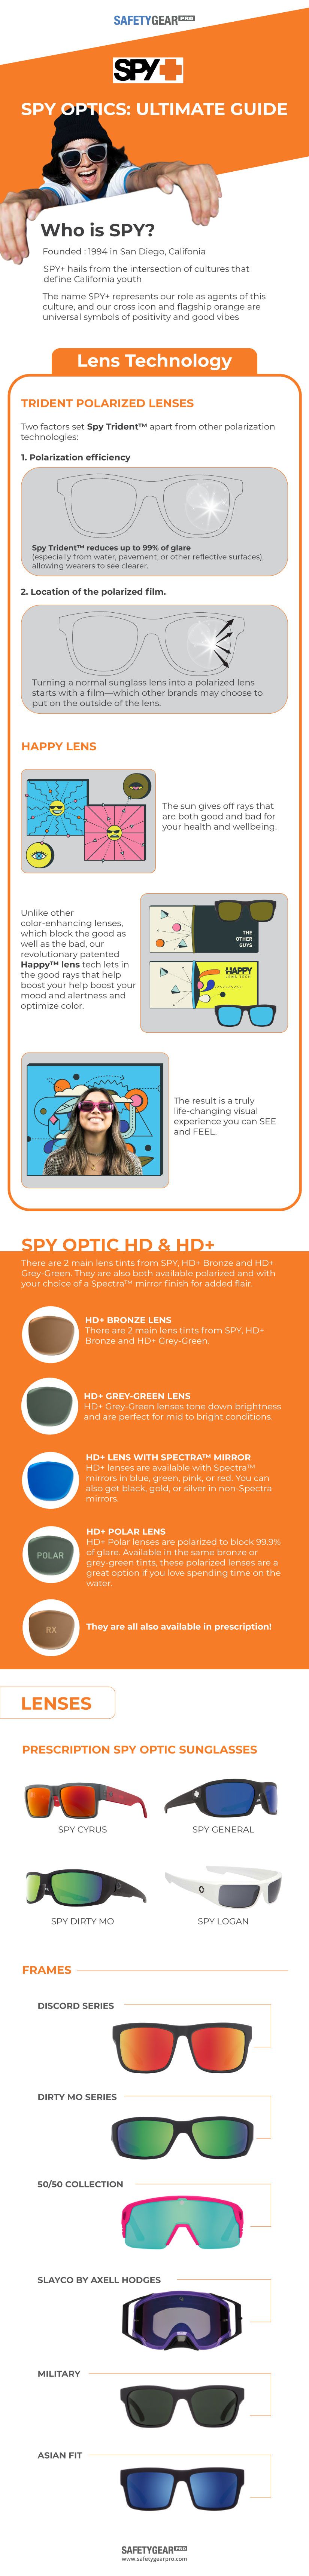 The Ultimate Guide to Spy Infographic